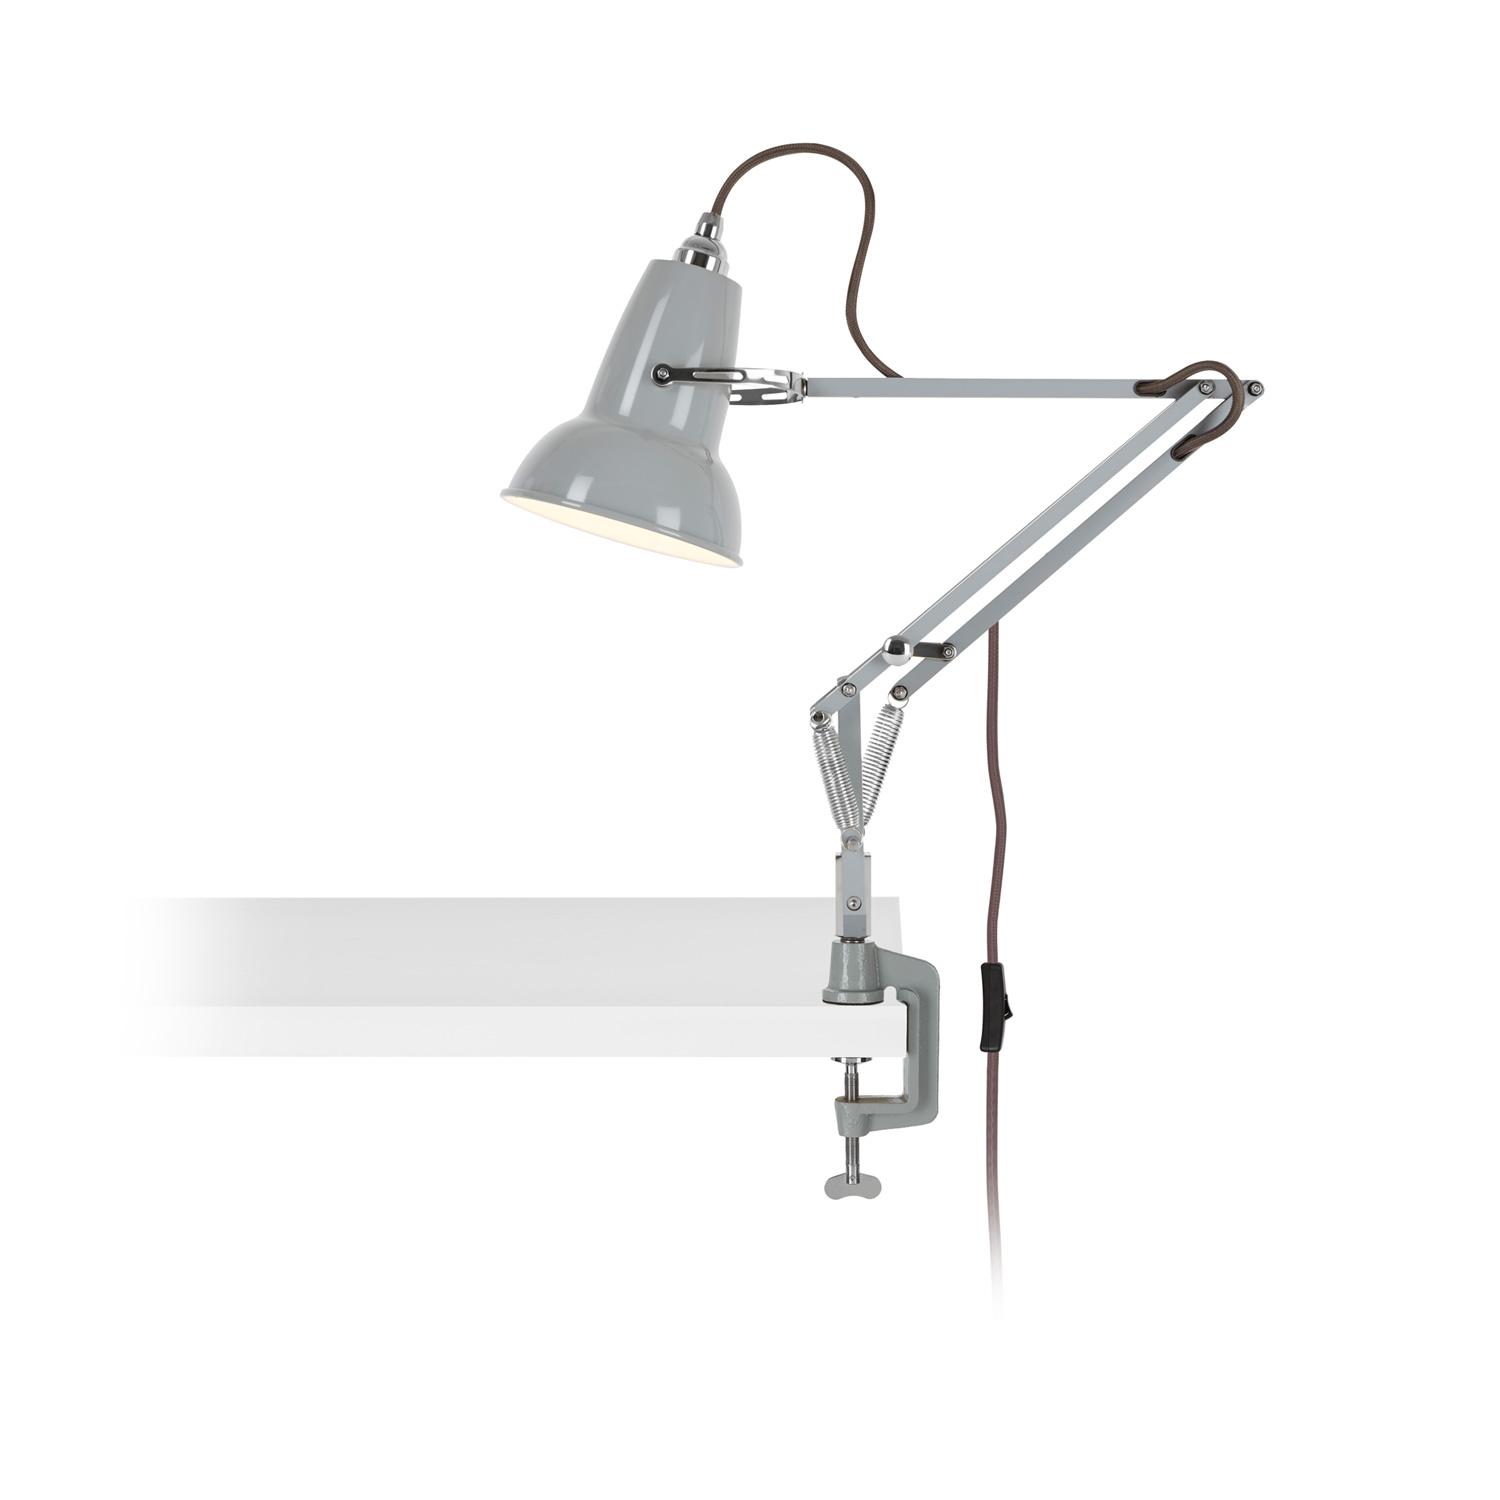 Original 1227 Mini Desk Lamp with Clamp | Anglepoise | Rypen